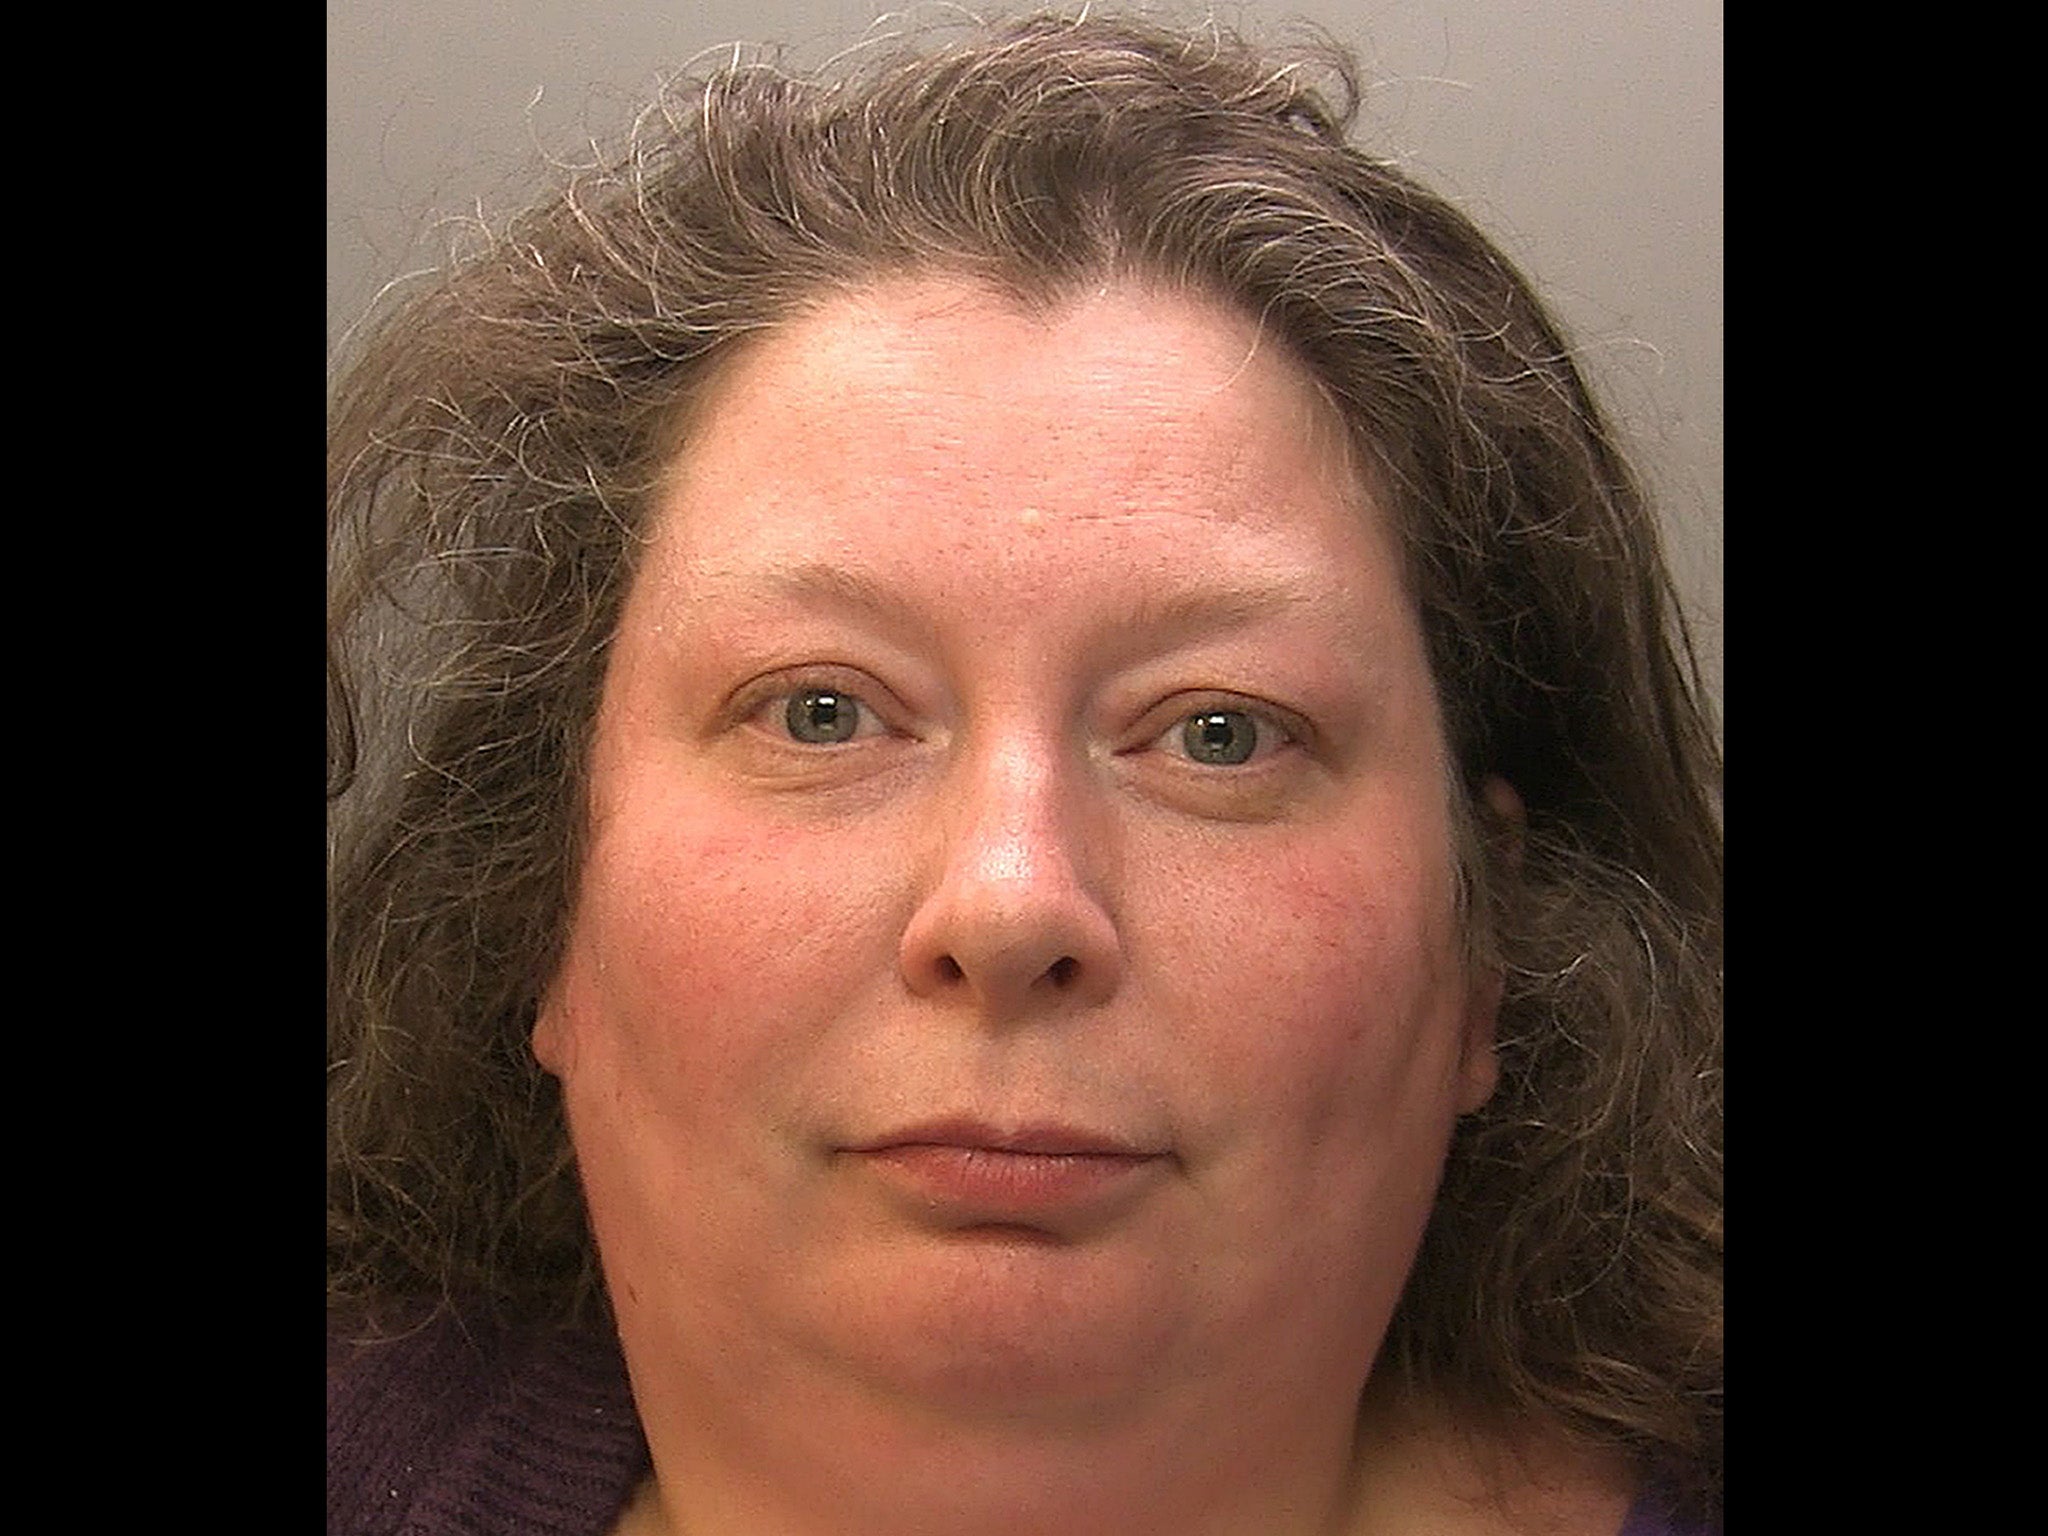 Woman jailed for manslaughter after &apos;gross neglect&apos; of her 91-year-old grandmother